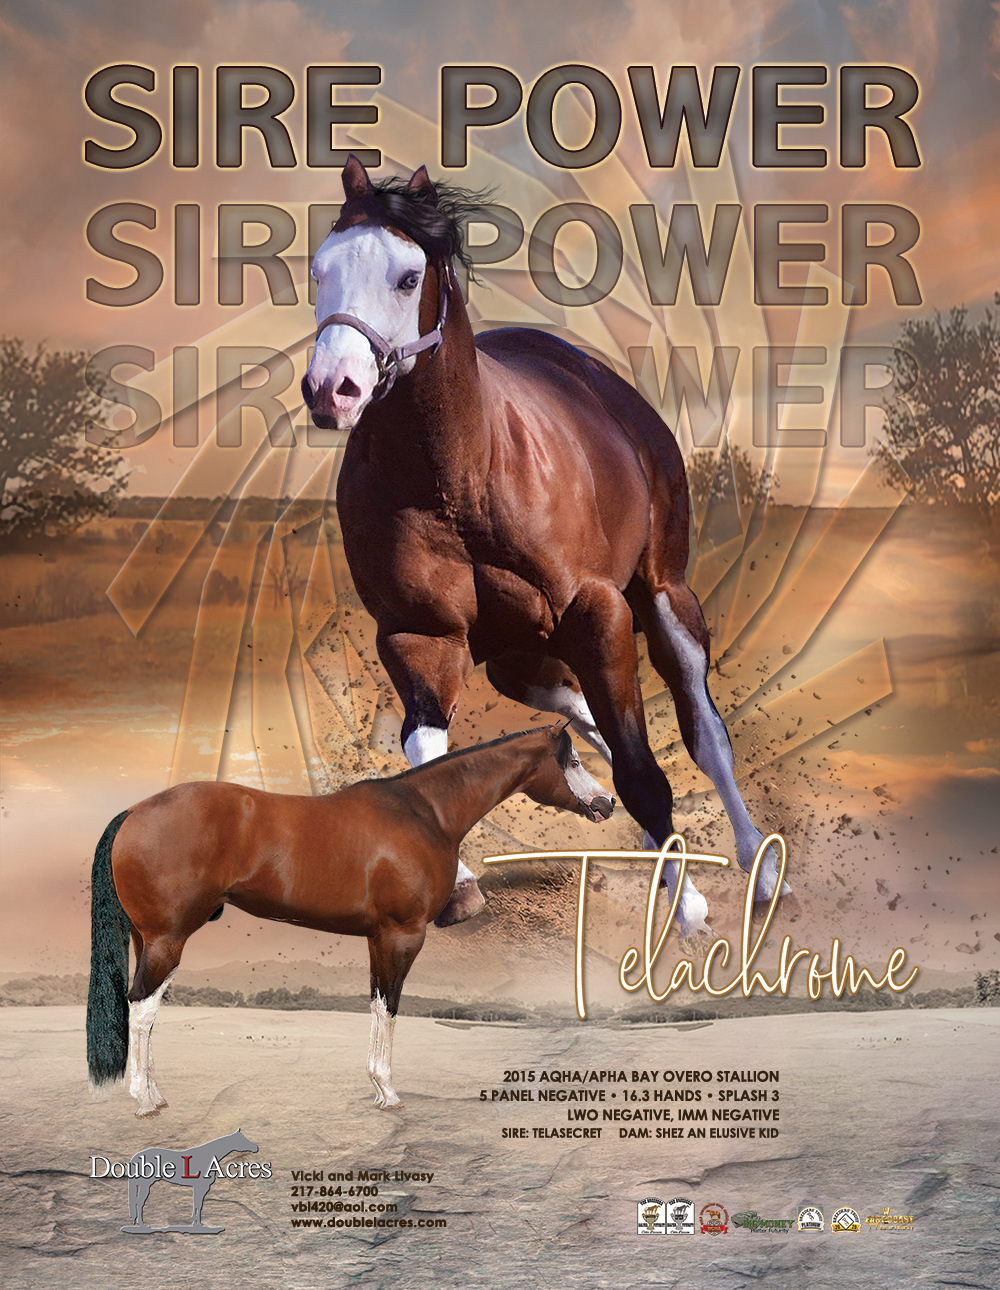 Sire Power Iem The One and Telachrome!